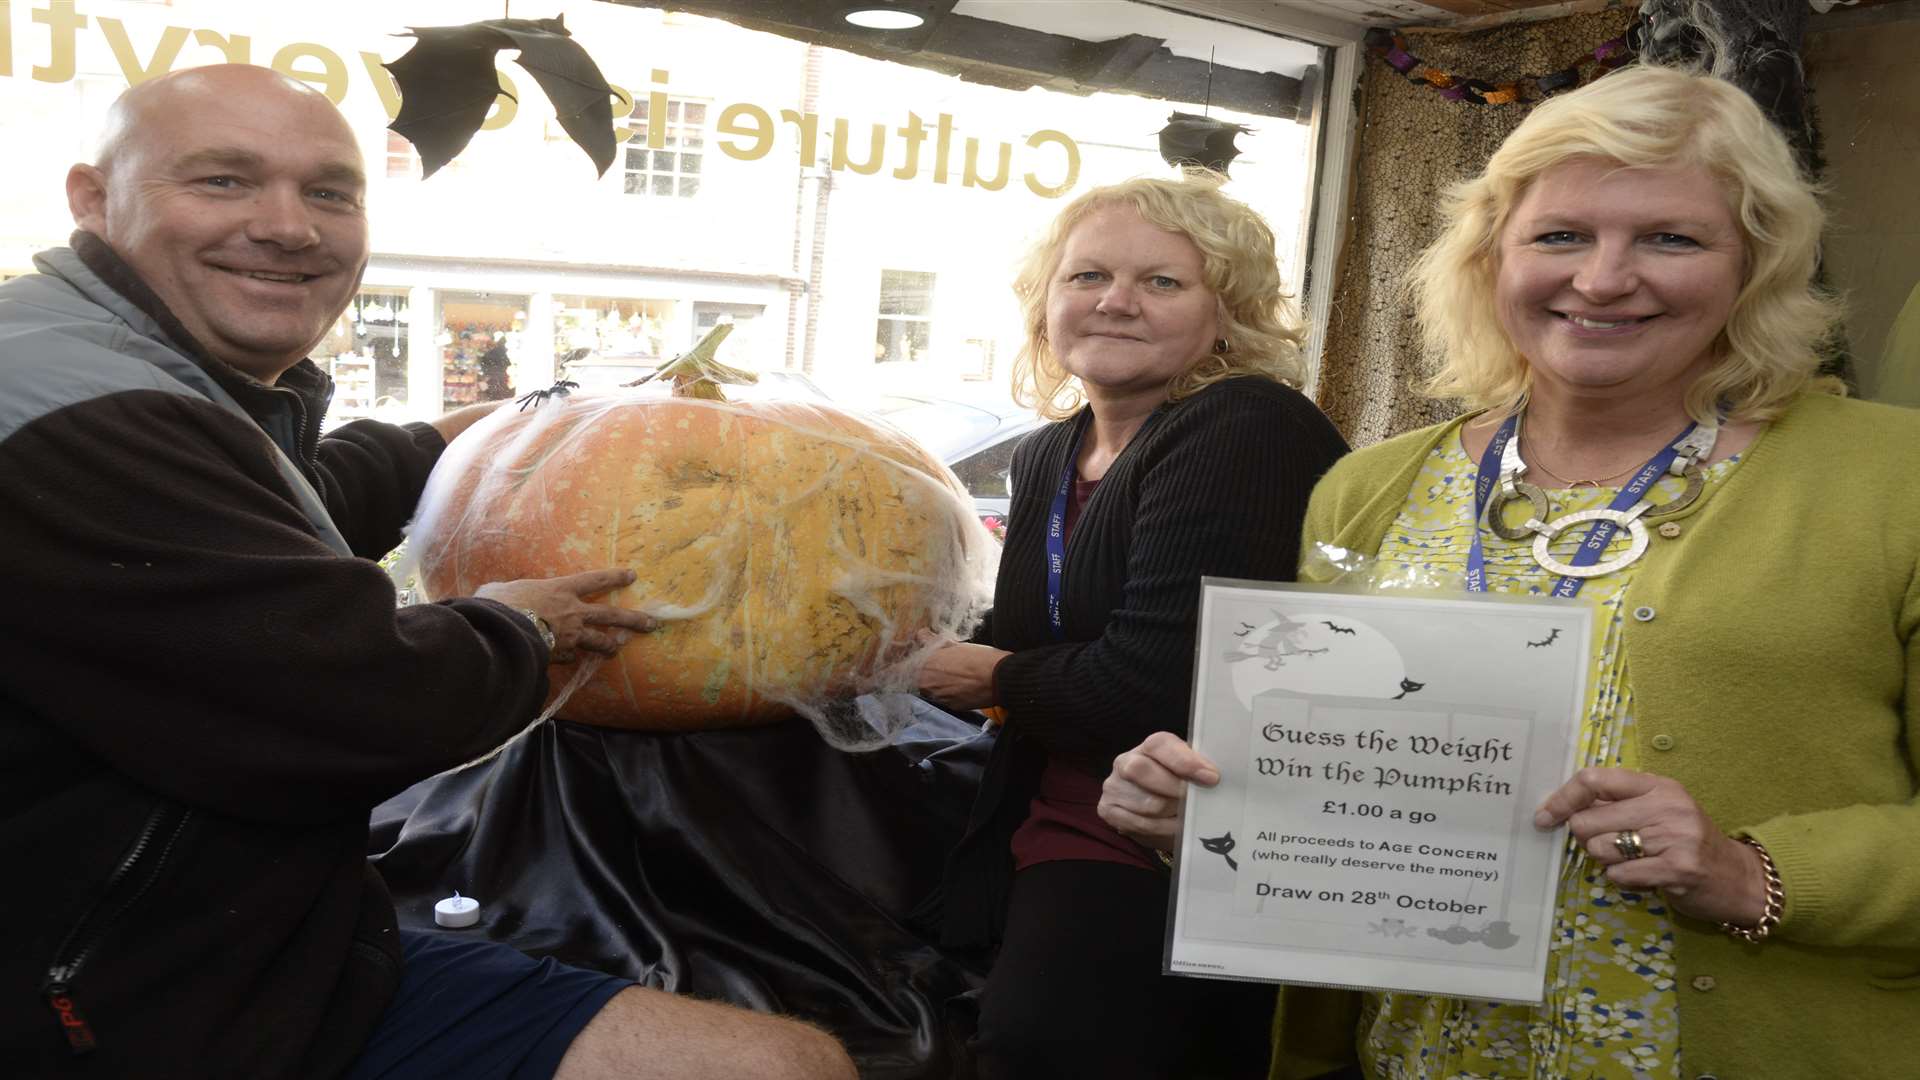 Simon with Jane Goring and Tracey Ward from Age Concern and the giant pumpkin at The Fruit Bowl in Sandwich